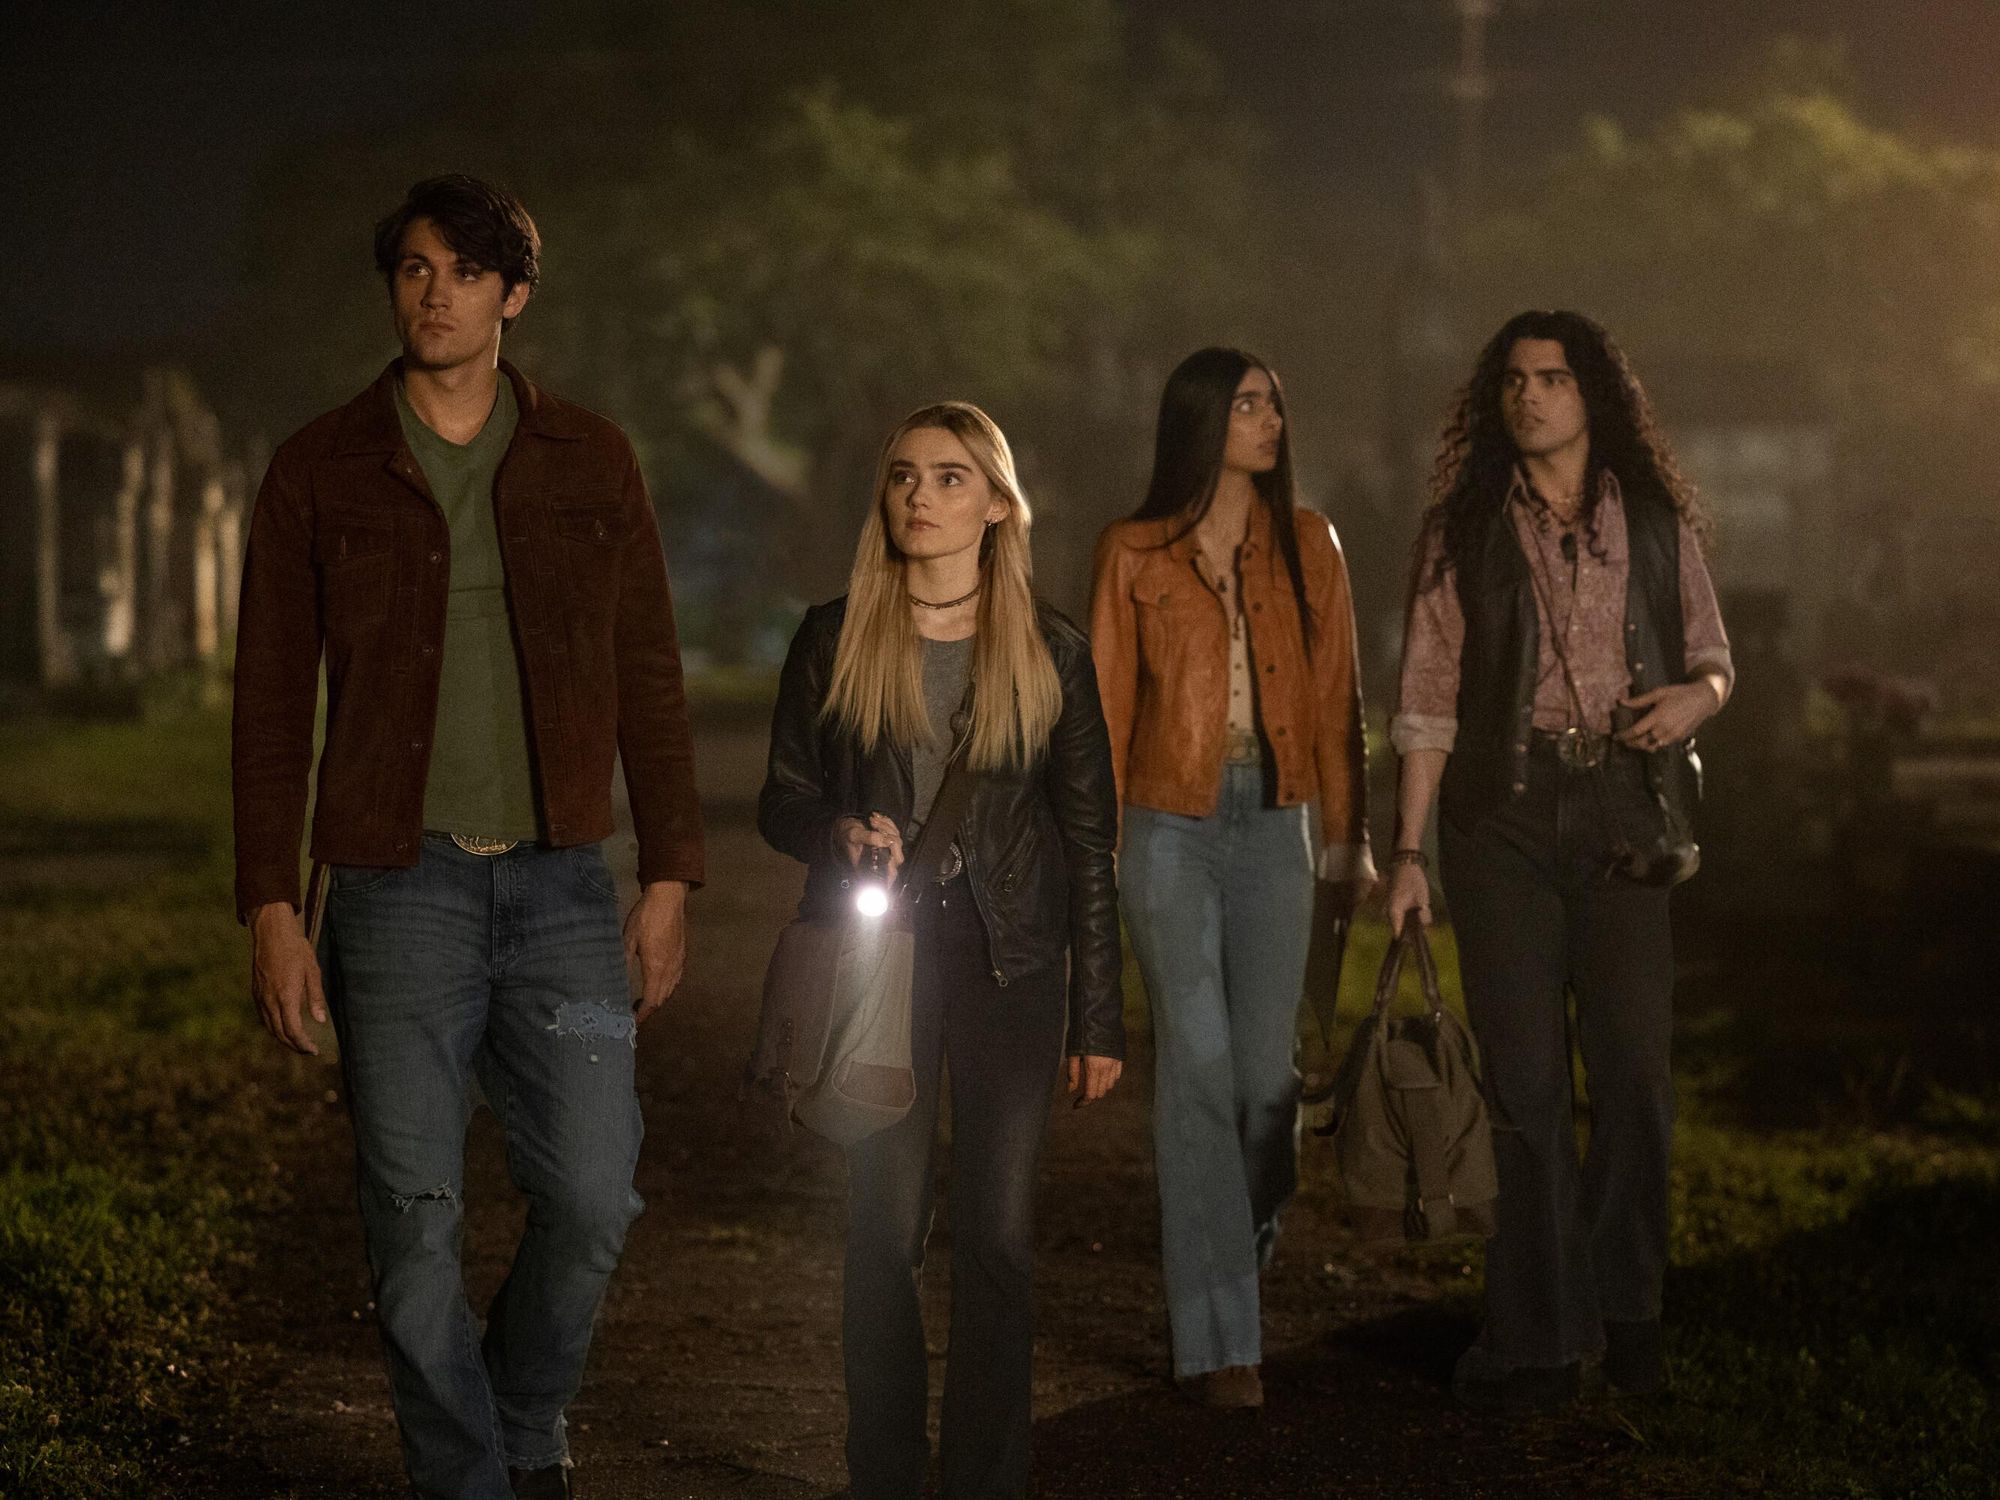 John Winchester and Mary Campbell walk down a dark path with their friends Latika Desai and Carlos Cervantez.